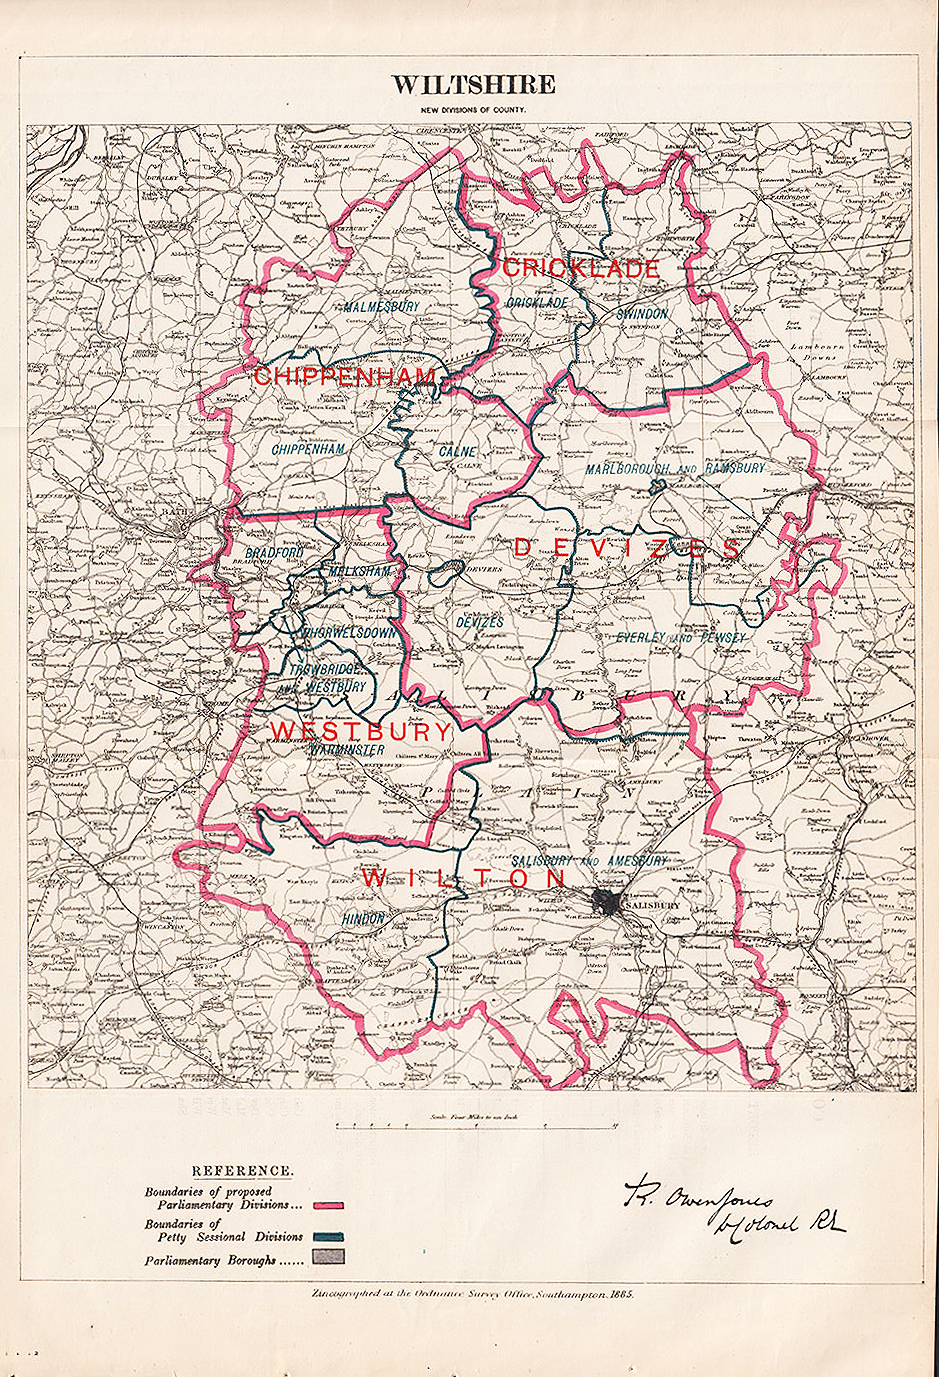 Wiltshire - New Divisions of County.